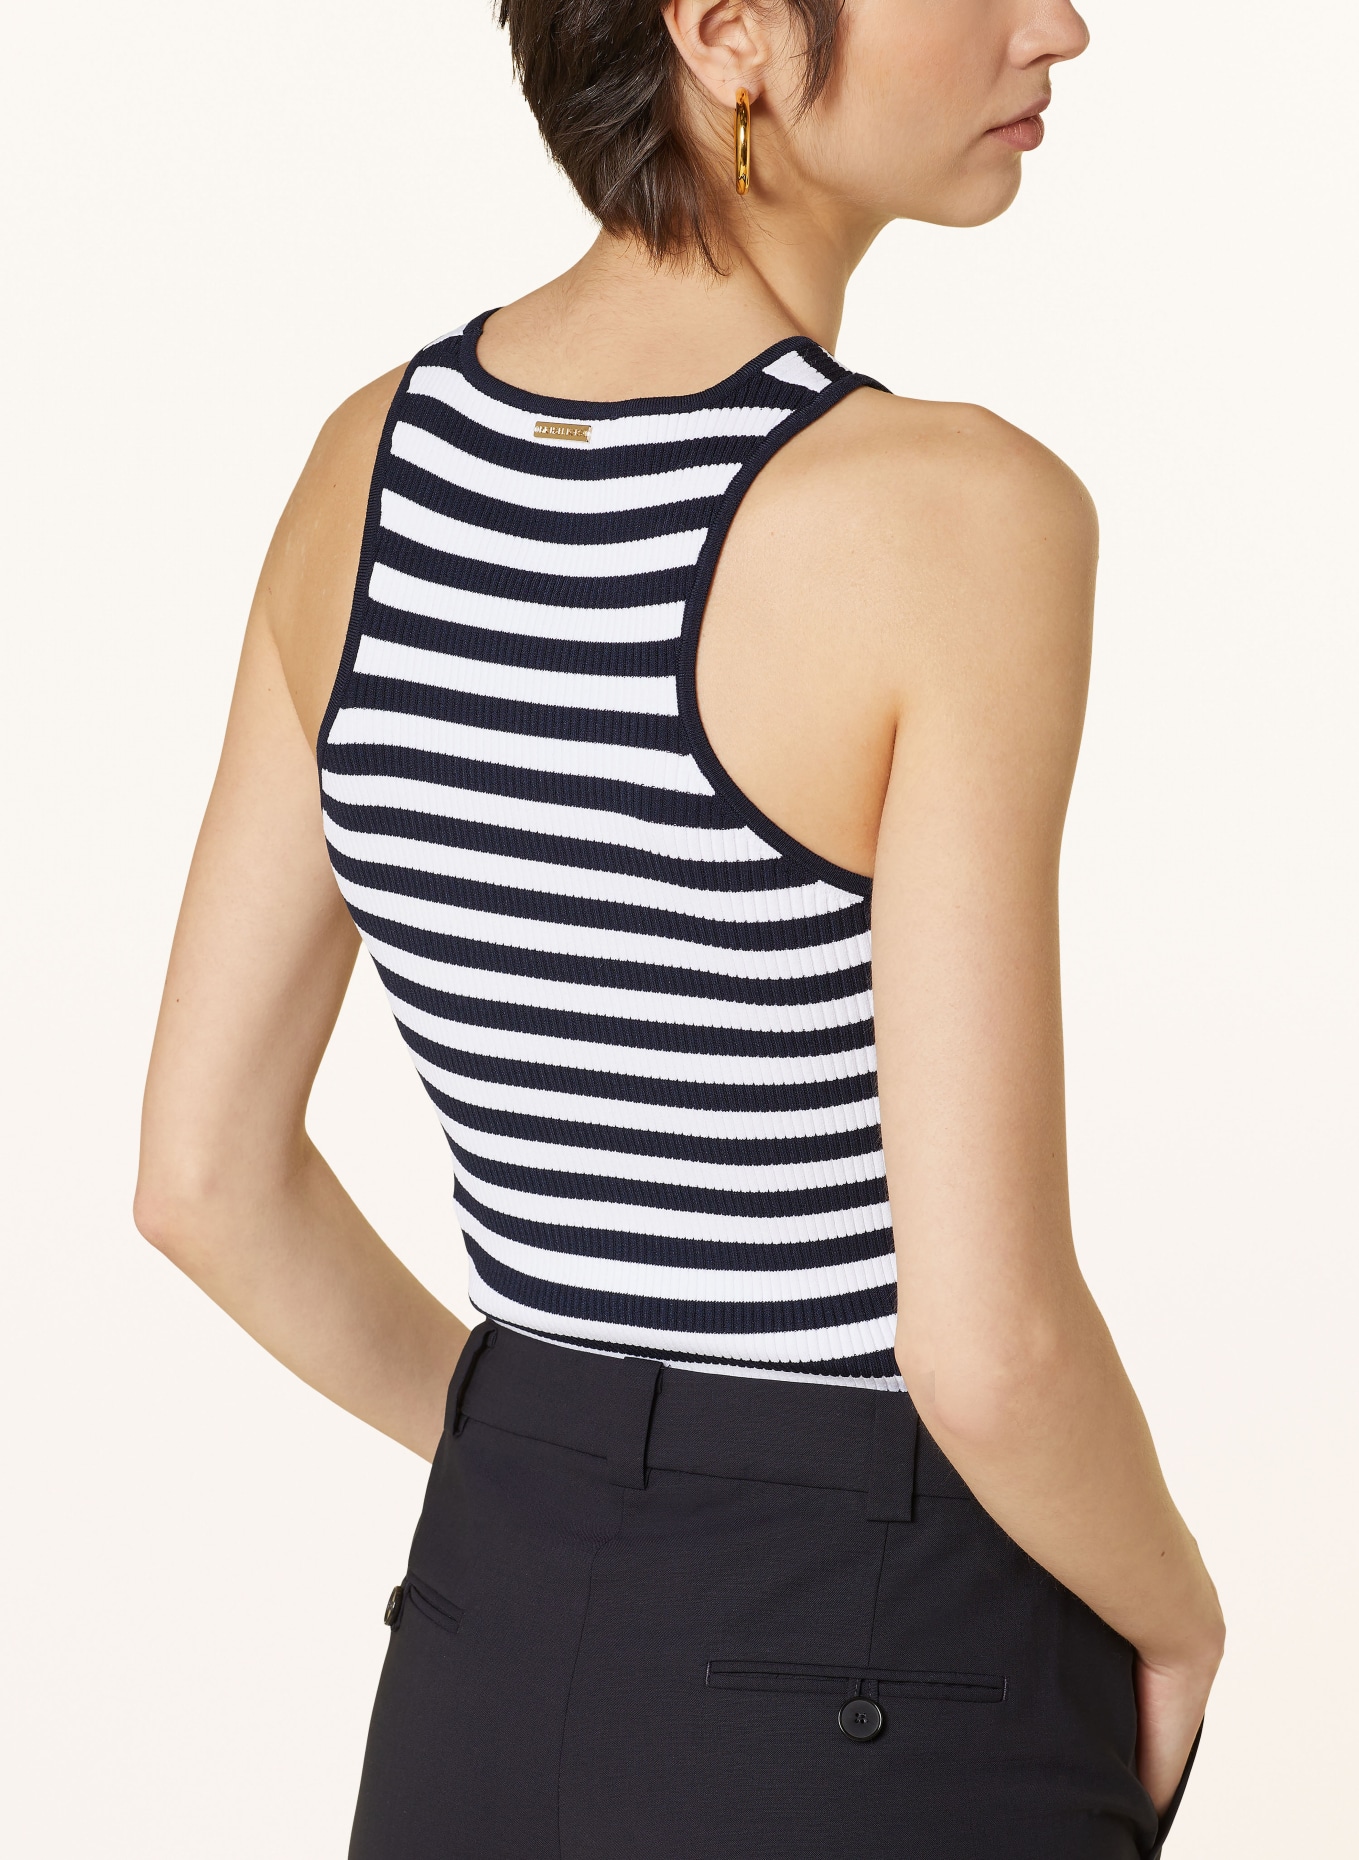 MICHAEL KORS Cropped knit top, Color: DARK BLUE/ WHITE (Image 4)